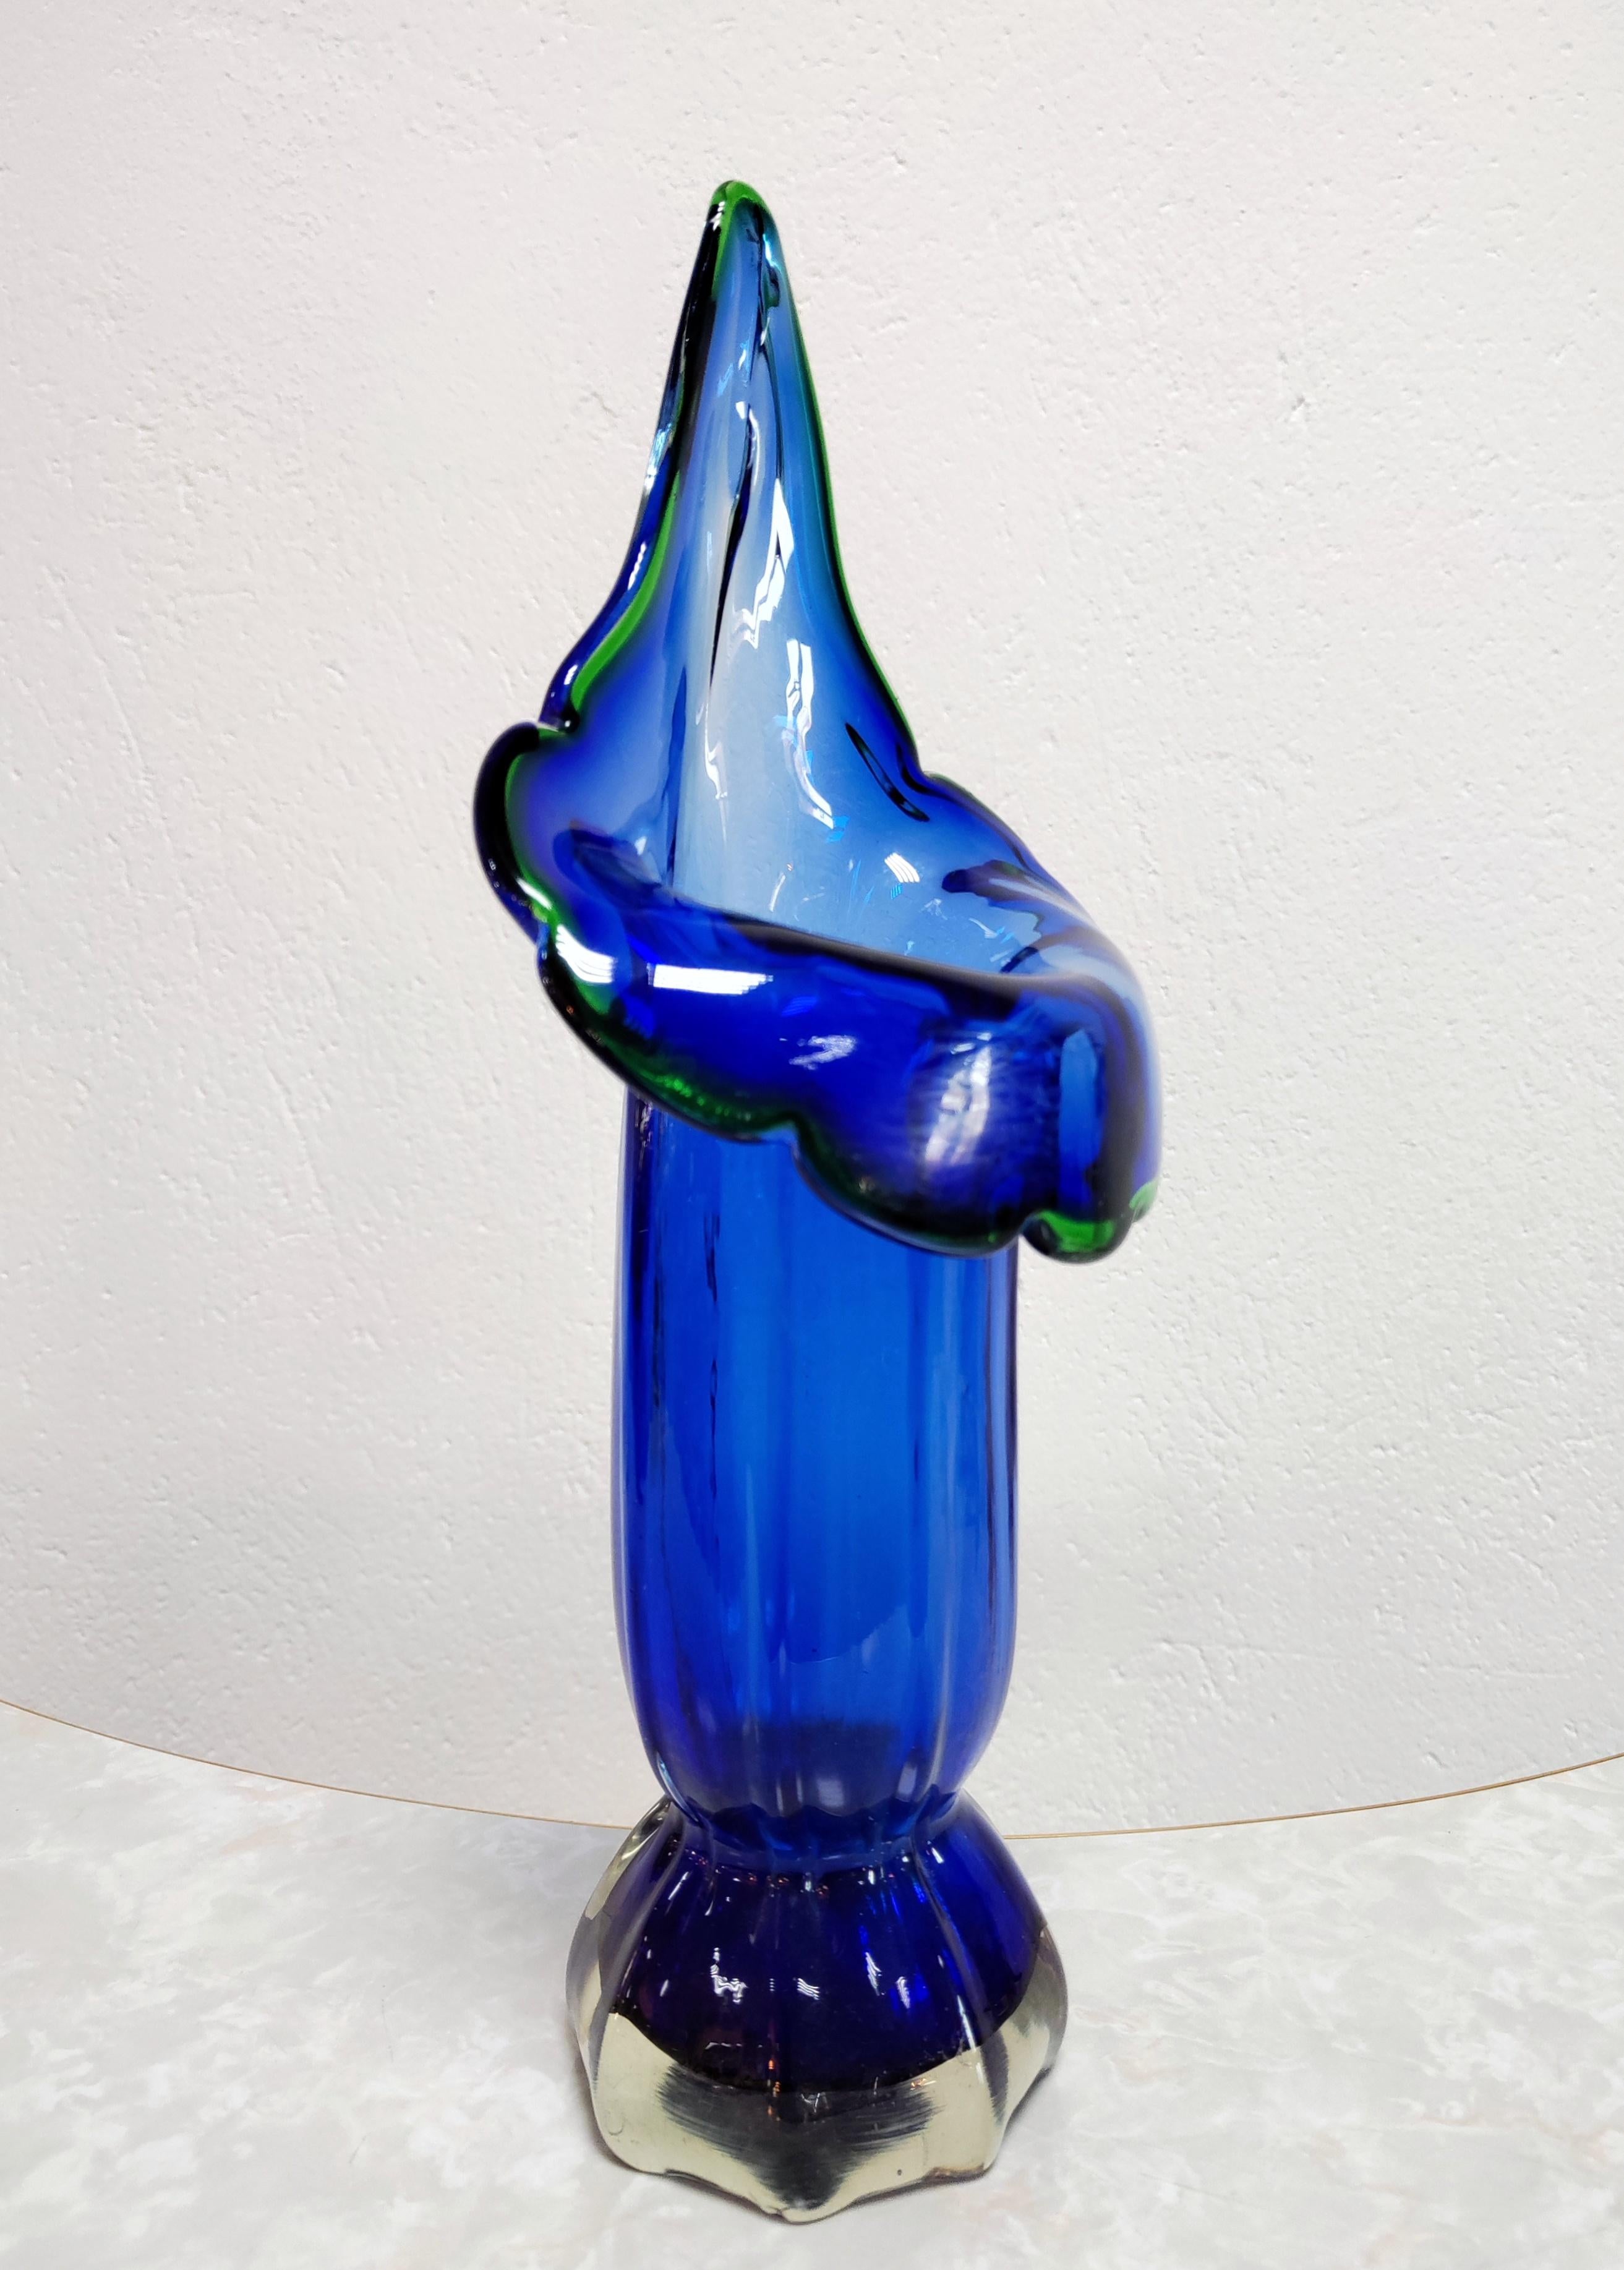 In this listing you will find a very rare and stunning, large mouthblown Murano glass vase done in cobalt blue, thick glass, with the green rim around the flower petal, shaped as Calla Lily. Elegant shape and vibrant colour make it a perfect accent